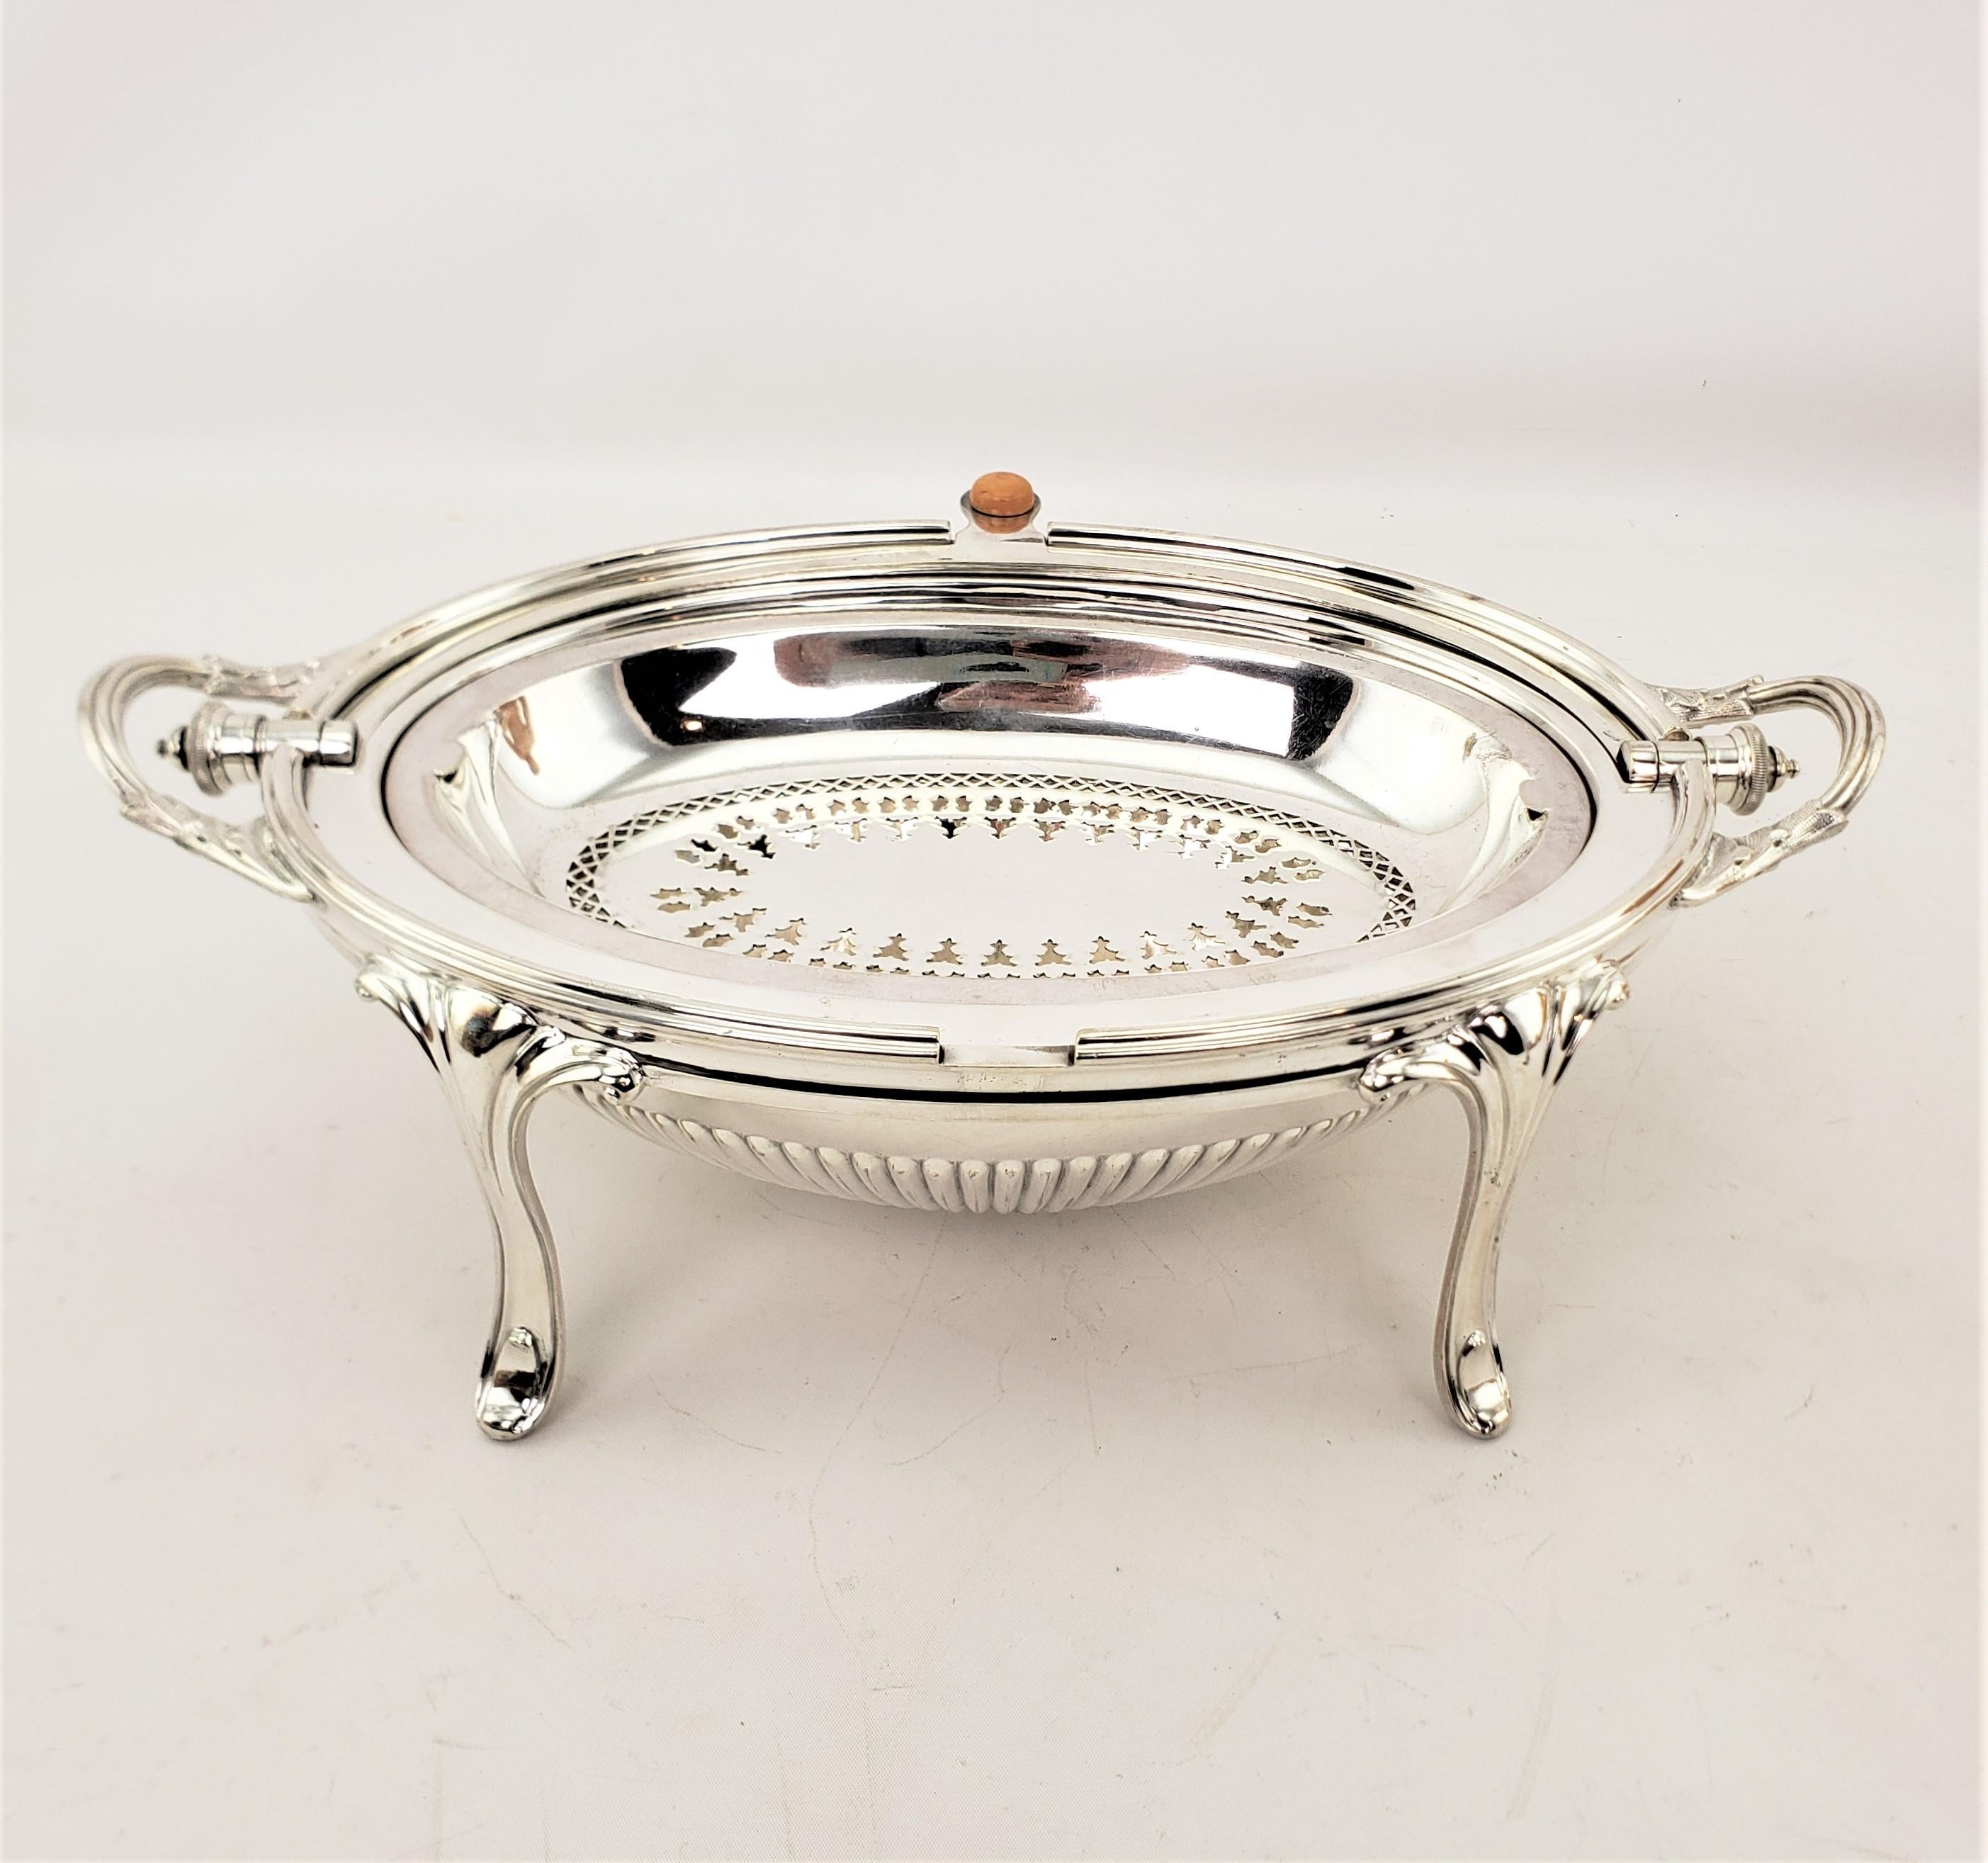 Antique English Silver Plated Domed Breakfast Warmer or Server 3